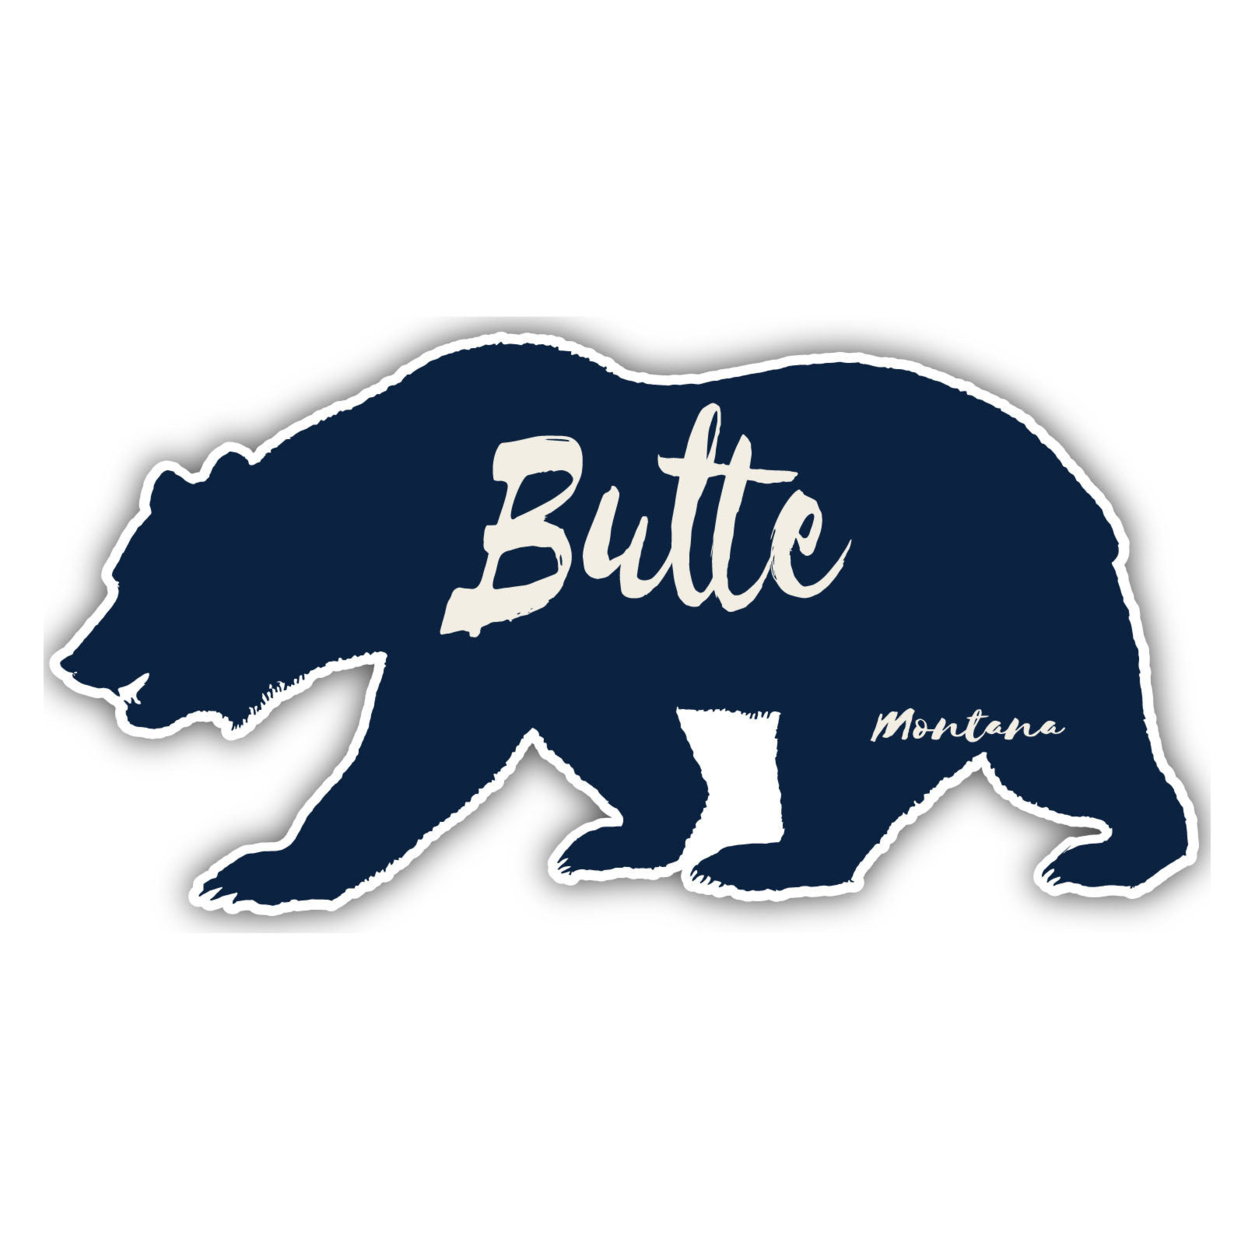 Butte Montana Souvenir Decorative Stickers (Choose Theme And Size) - 4-Pack, 2-Inch, Tent